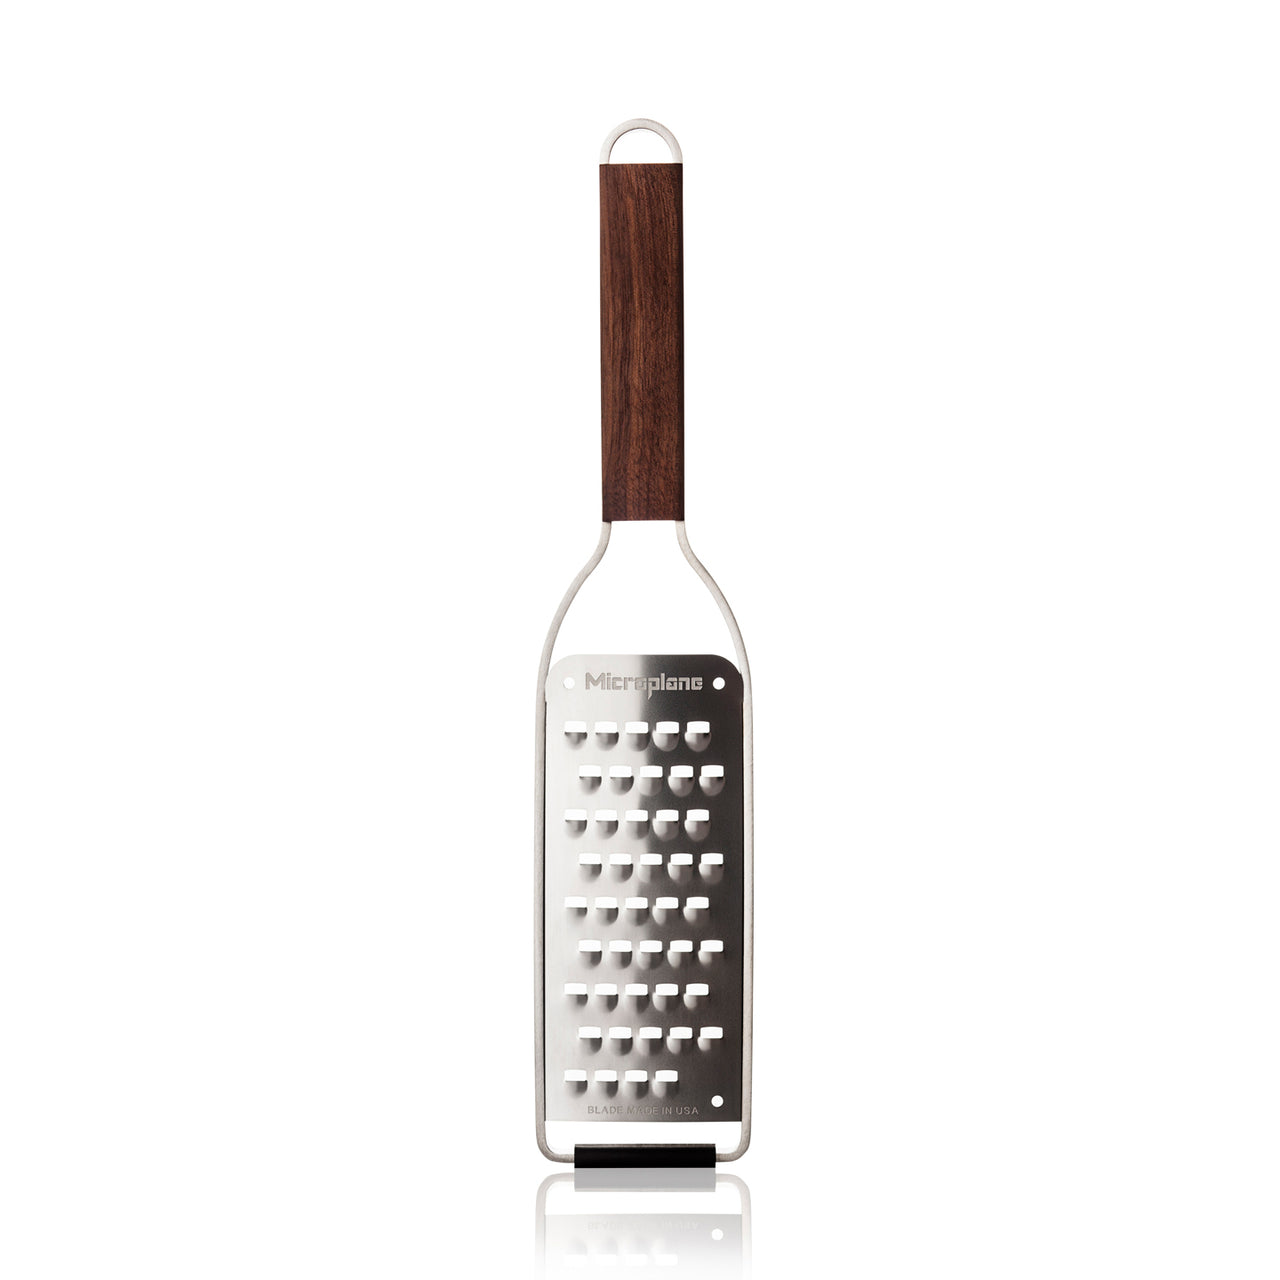 Microplane - Extra Coarse Grater - NEW Serie Black Sheep